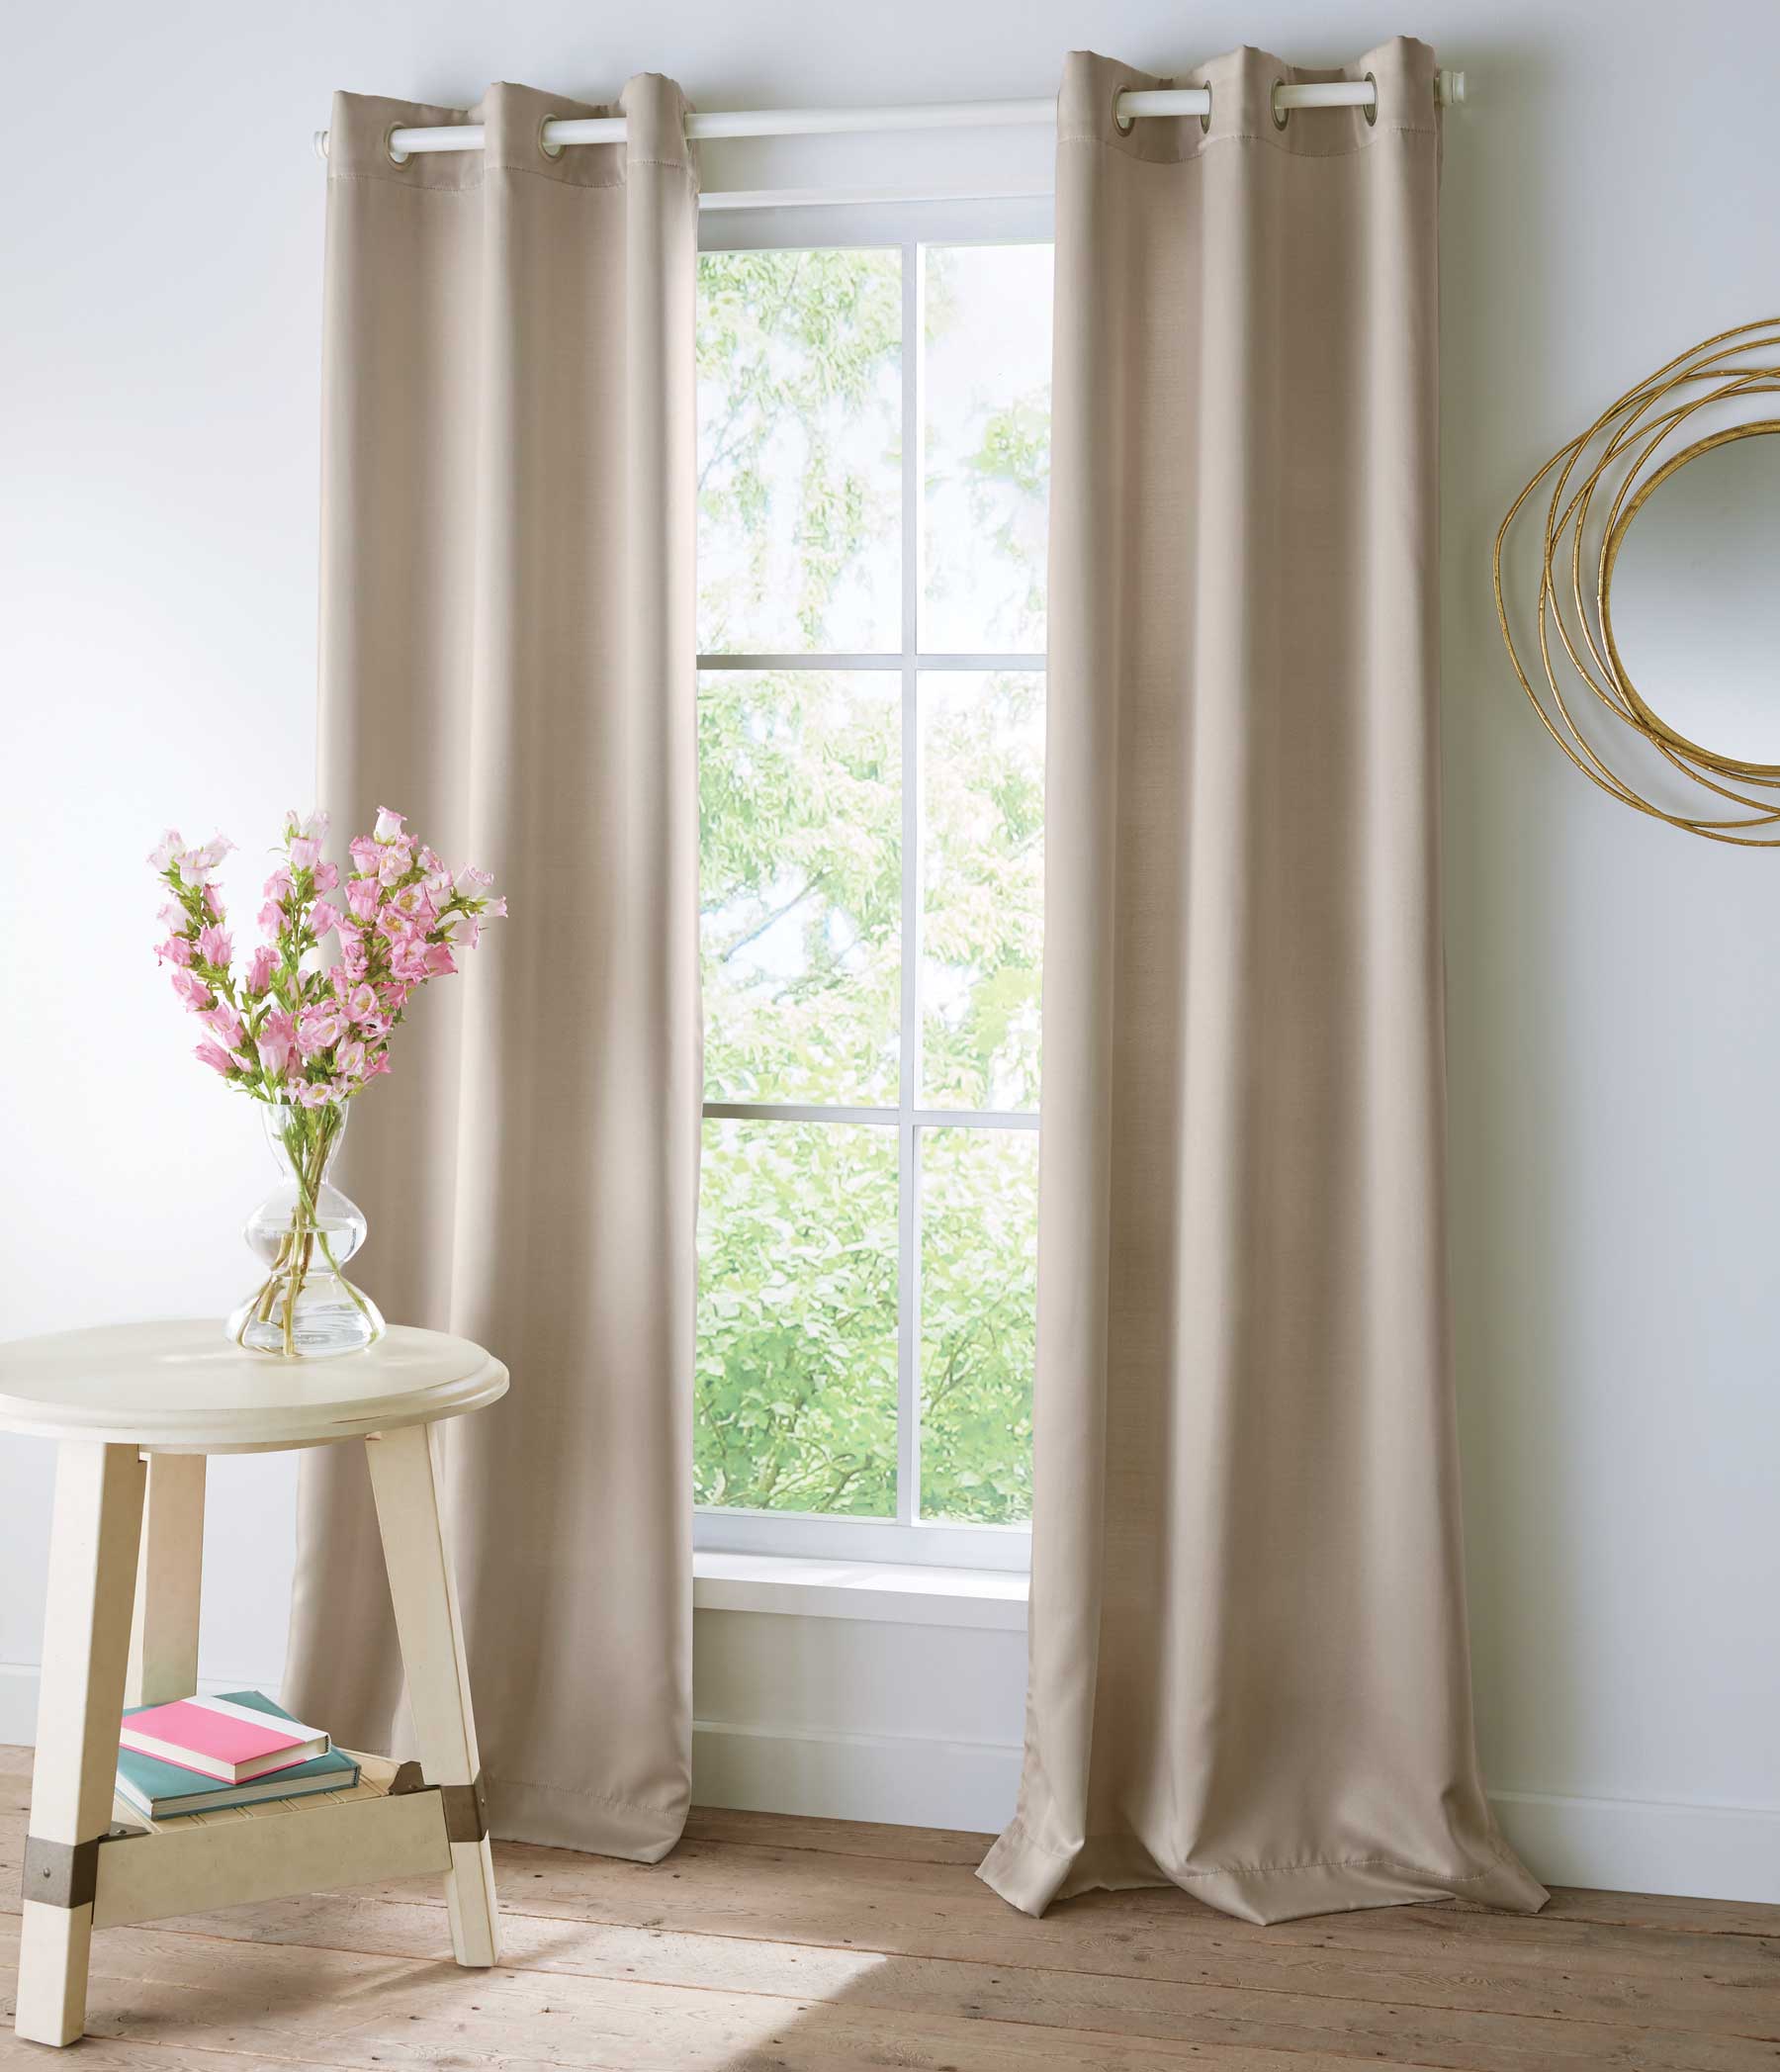 Curtain Ideas for Your Bedroom